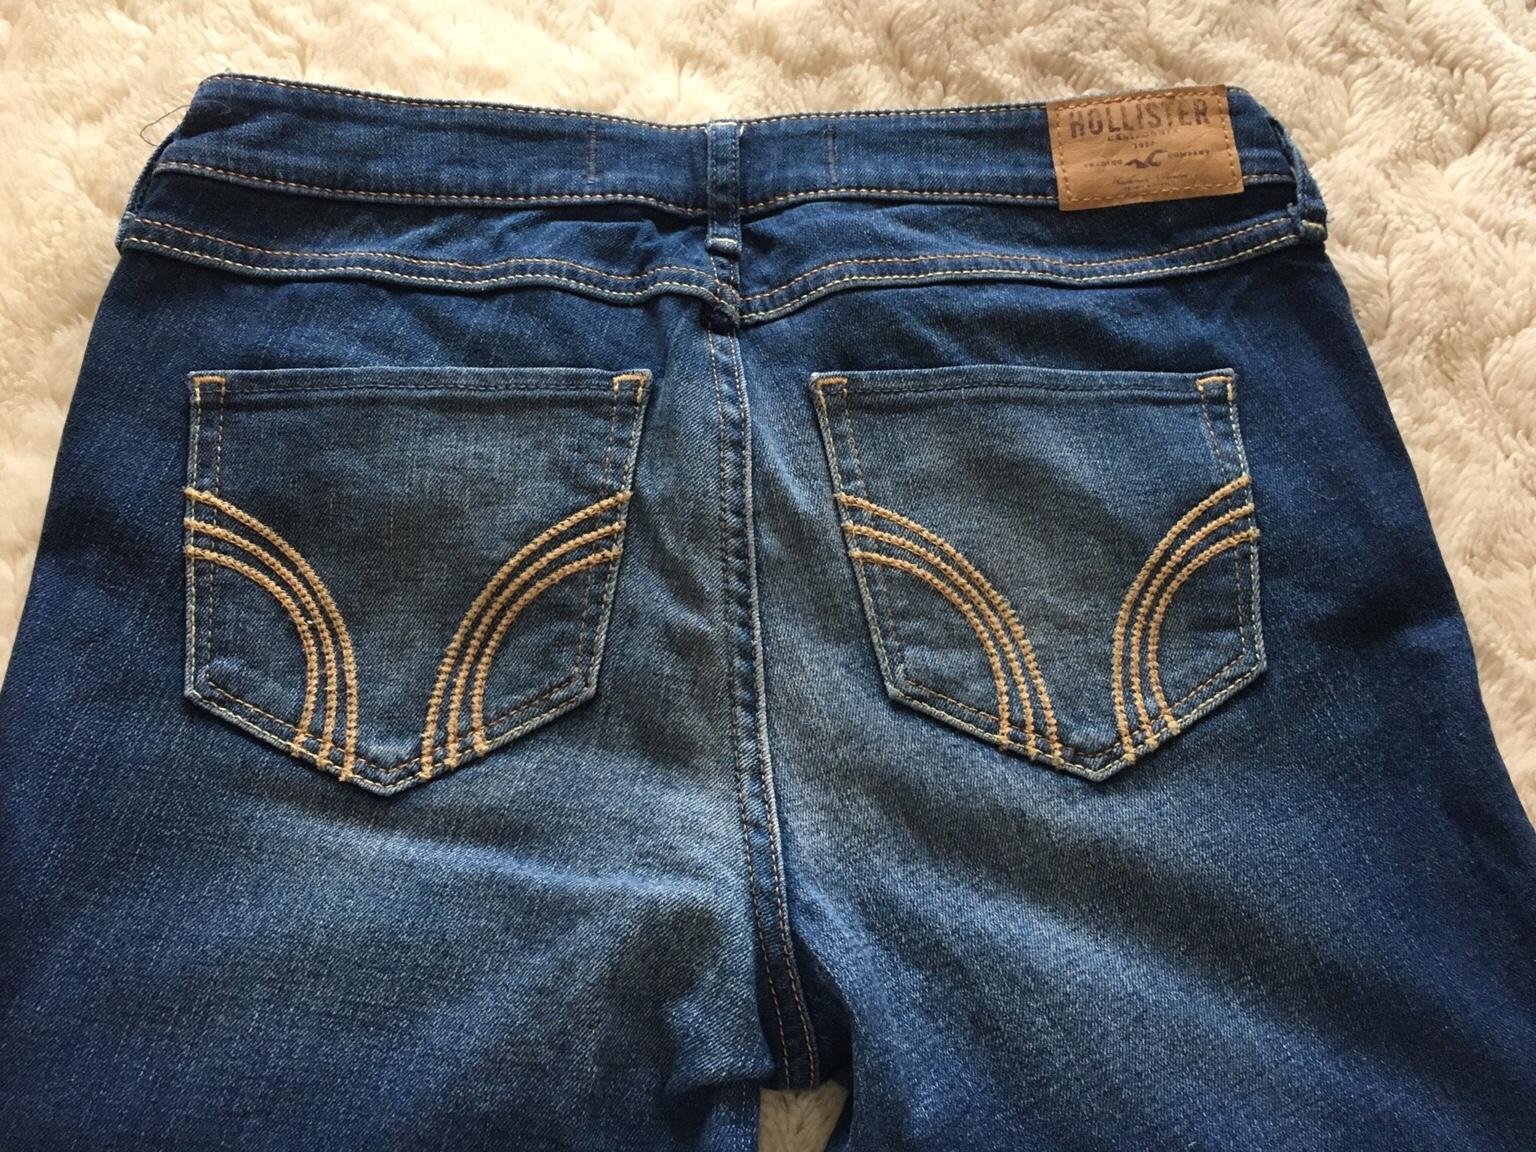 hollister jeans price in india